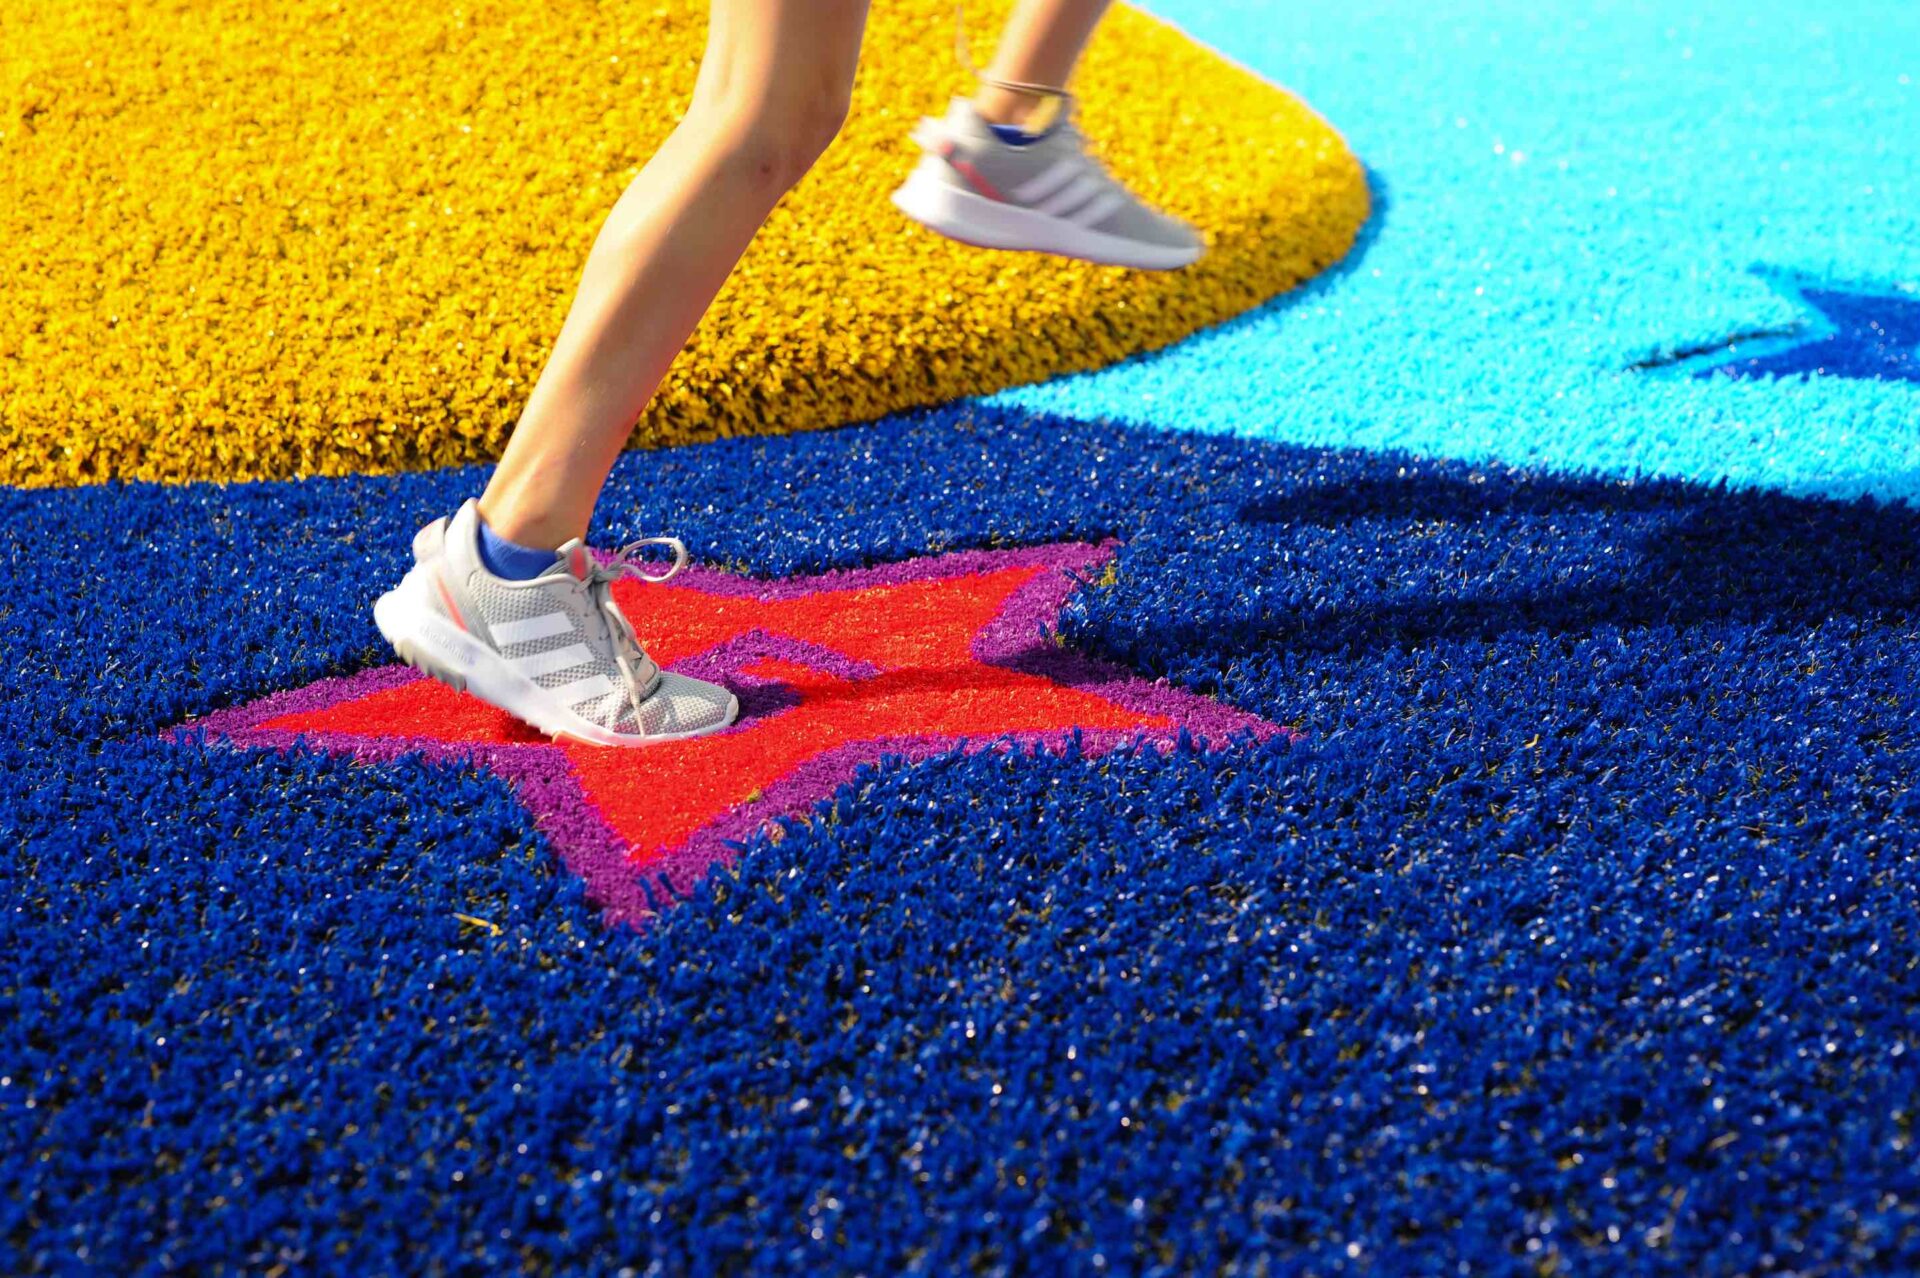 The image shows the legs of a person walking across a textured surface with bright primary colors and a red star pattern, likely at an outdoor event.